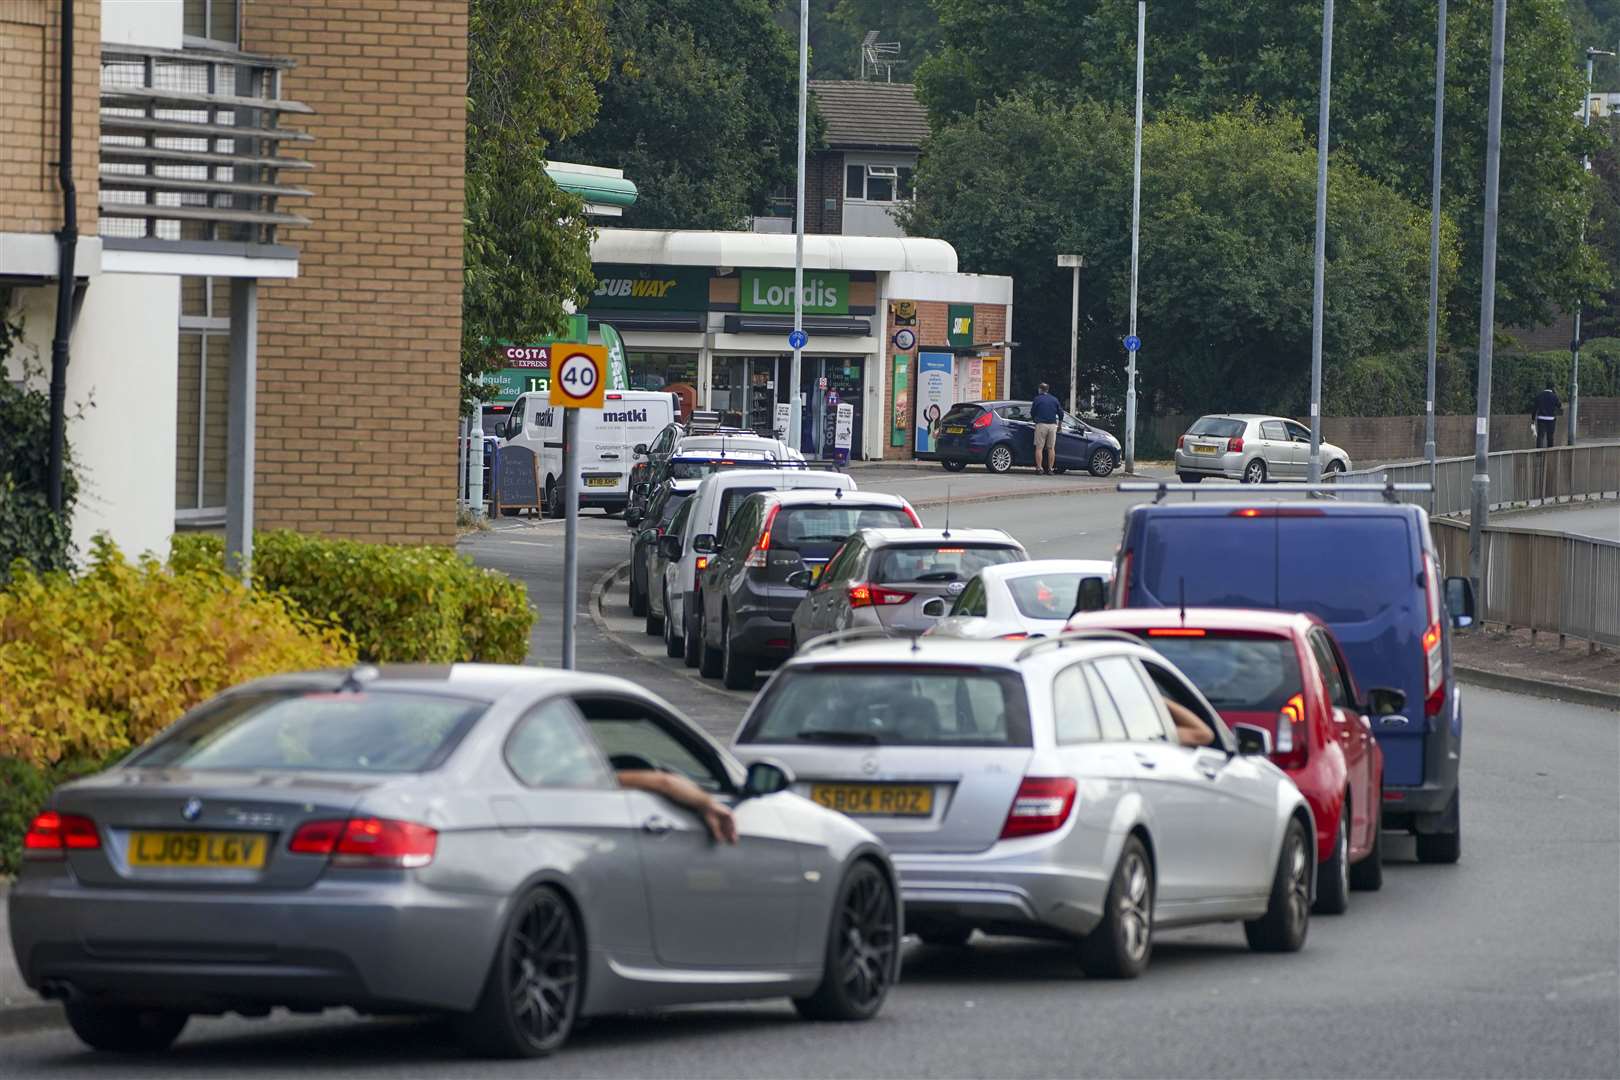 Cars queue for fuel at a BP petrol station in Bracknell, Berkshire (PA)